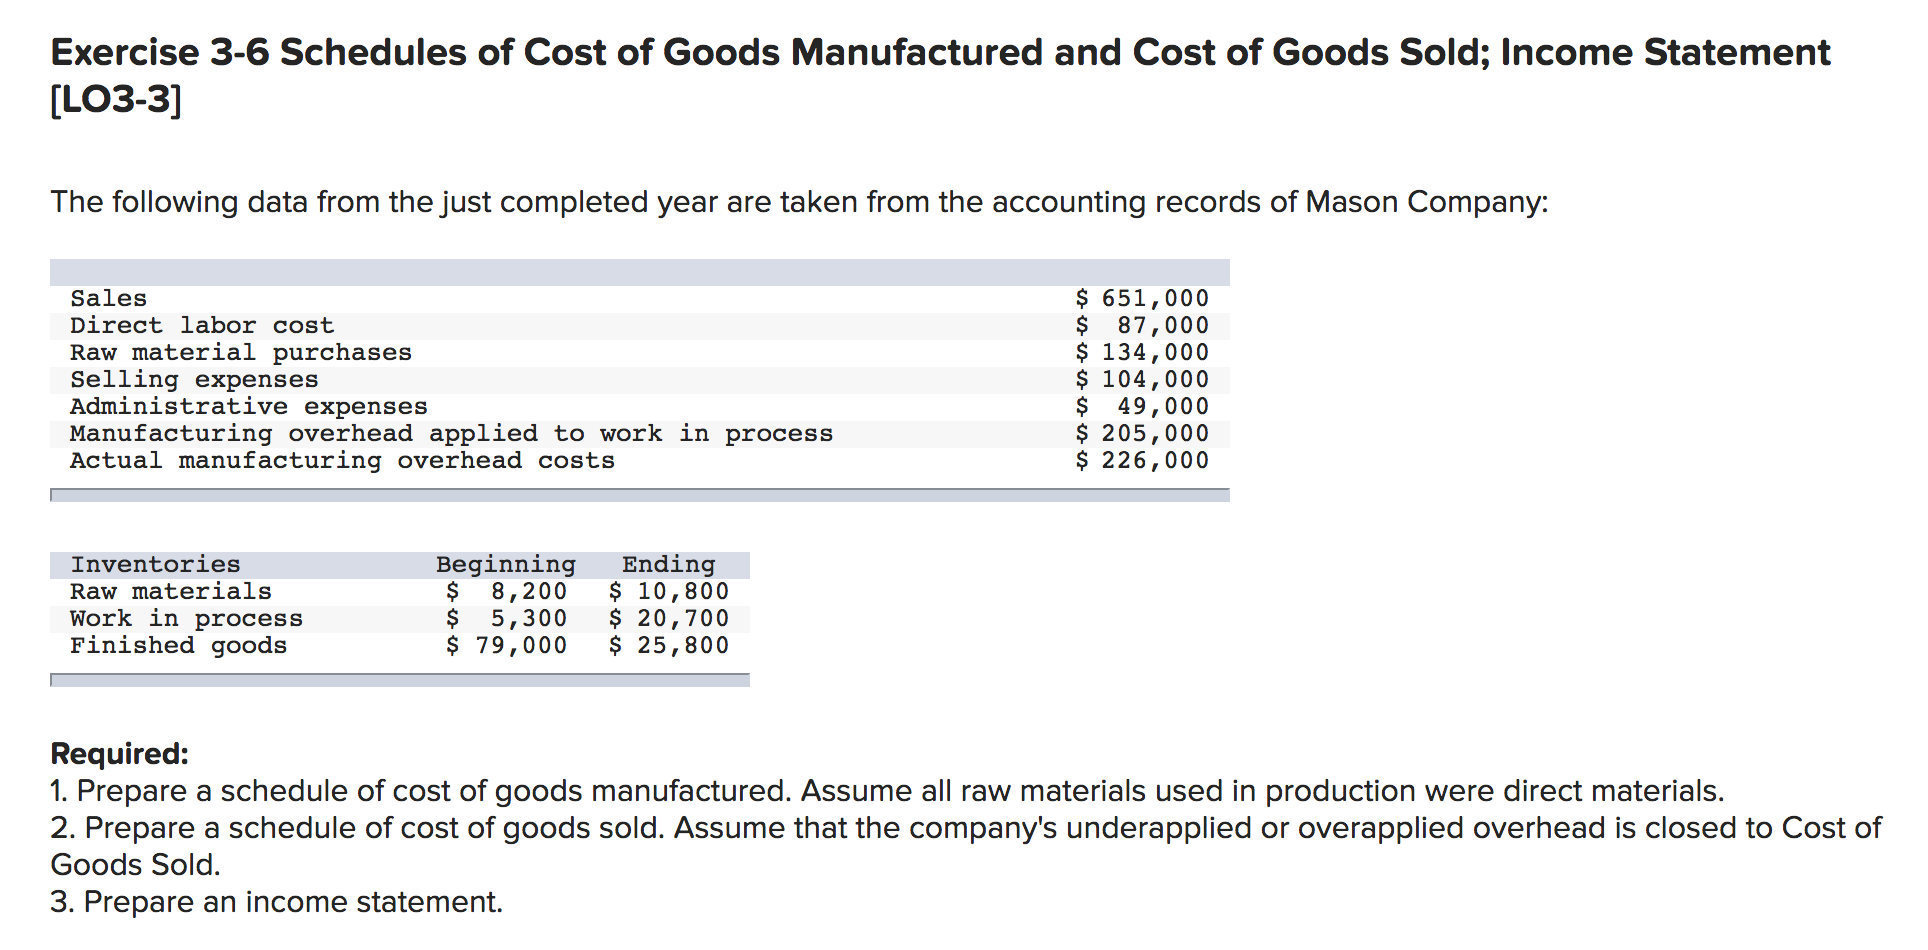 Exercise 3-6 Schedules of Cost of Goods Manufactured and Cost of Goods Sold; Income Statement
[LO3-3]
The following data from the just completed year are taken from the accounting records of Mason Company:
$ 651,000
$87,000
$ 134,000
$ 104,000
$ 49,000
$ 205,000
$ 226,000
Sales
Direct labor cost
Raw material purchases
Selling expenses
Administrative expenses
Manufacturing overhead applied to work in process
Actual manufacturing overhead costs
Inventories
Raw materials
Work in process
Finished goods
Beginning
8,200
5,300
$ 79,000
Ending
$ 10,800
$ 20,700
$ 25,800
Required:
1. Prepare a schedule of cost of goods manufactured. ASsume all raw materials used in production were direct materials.
2. Prepare a schedule of cost of goods sold. Assume that the company's underapplied or overapplied overhead is closed to Cost of
Goods Sold.
3. Prepare an income statement.
